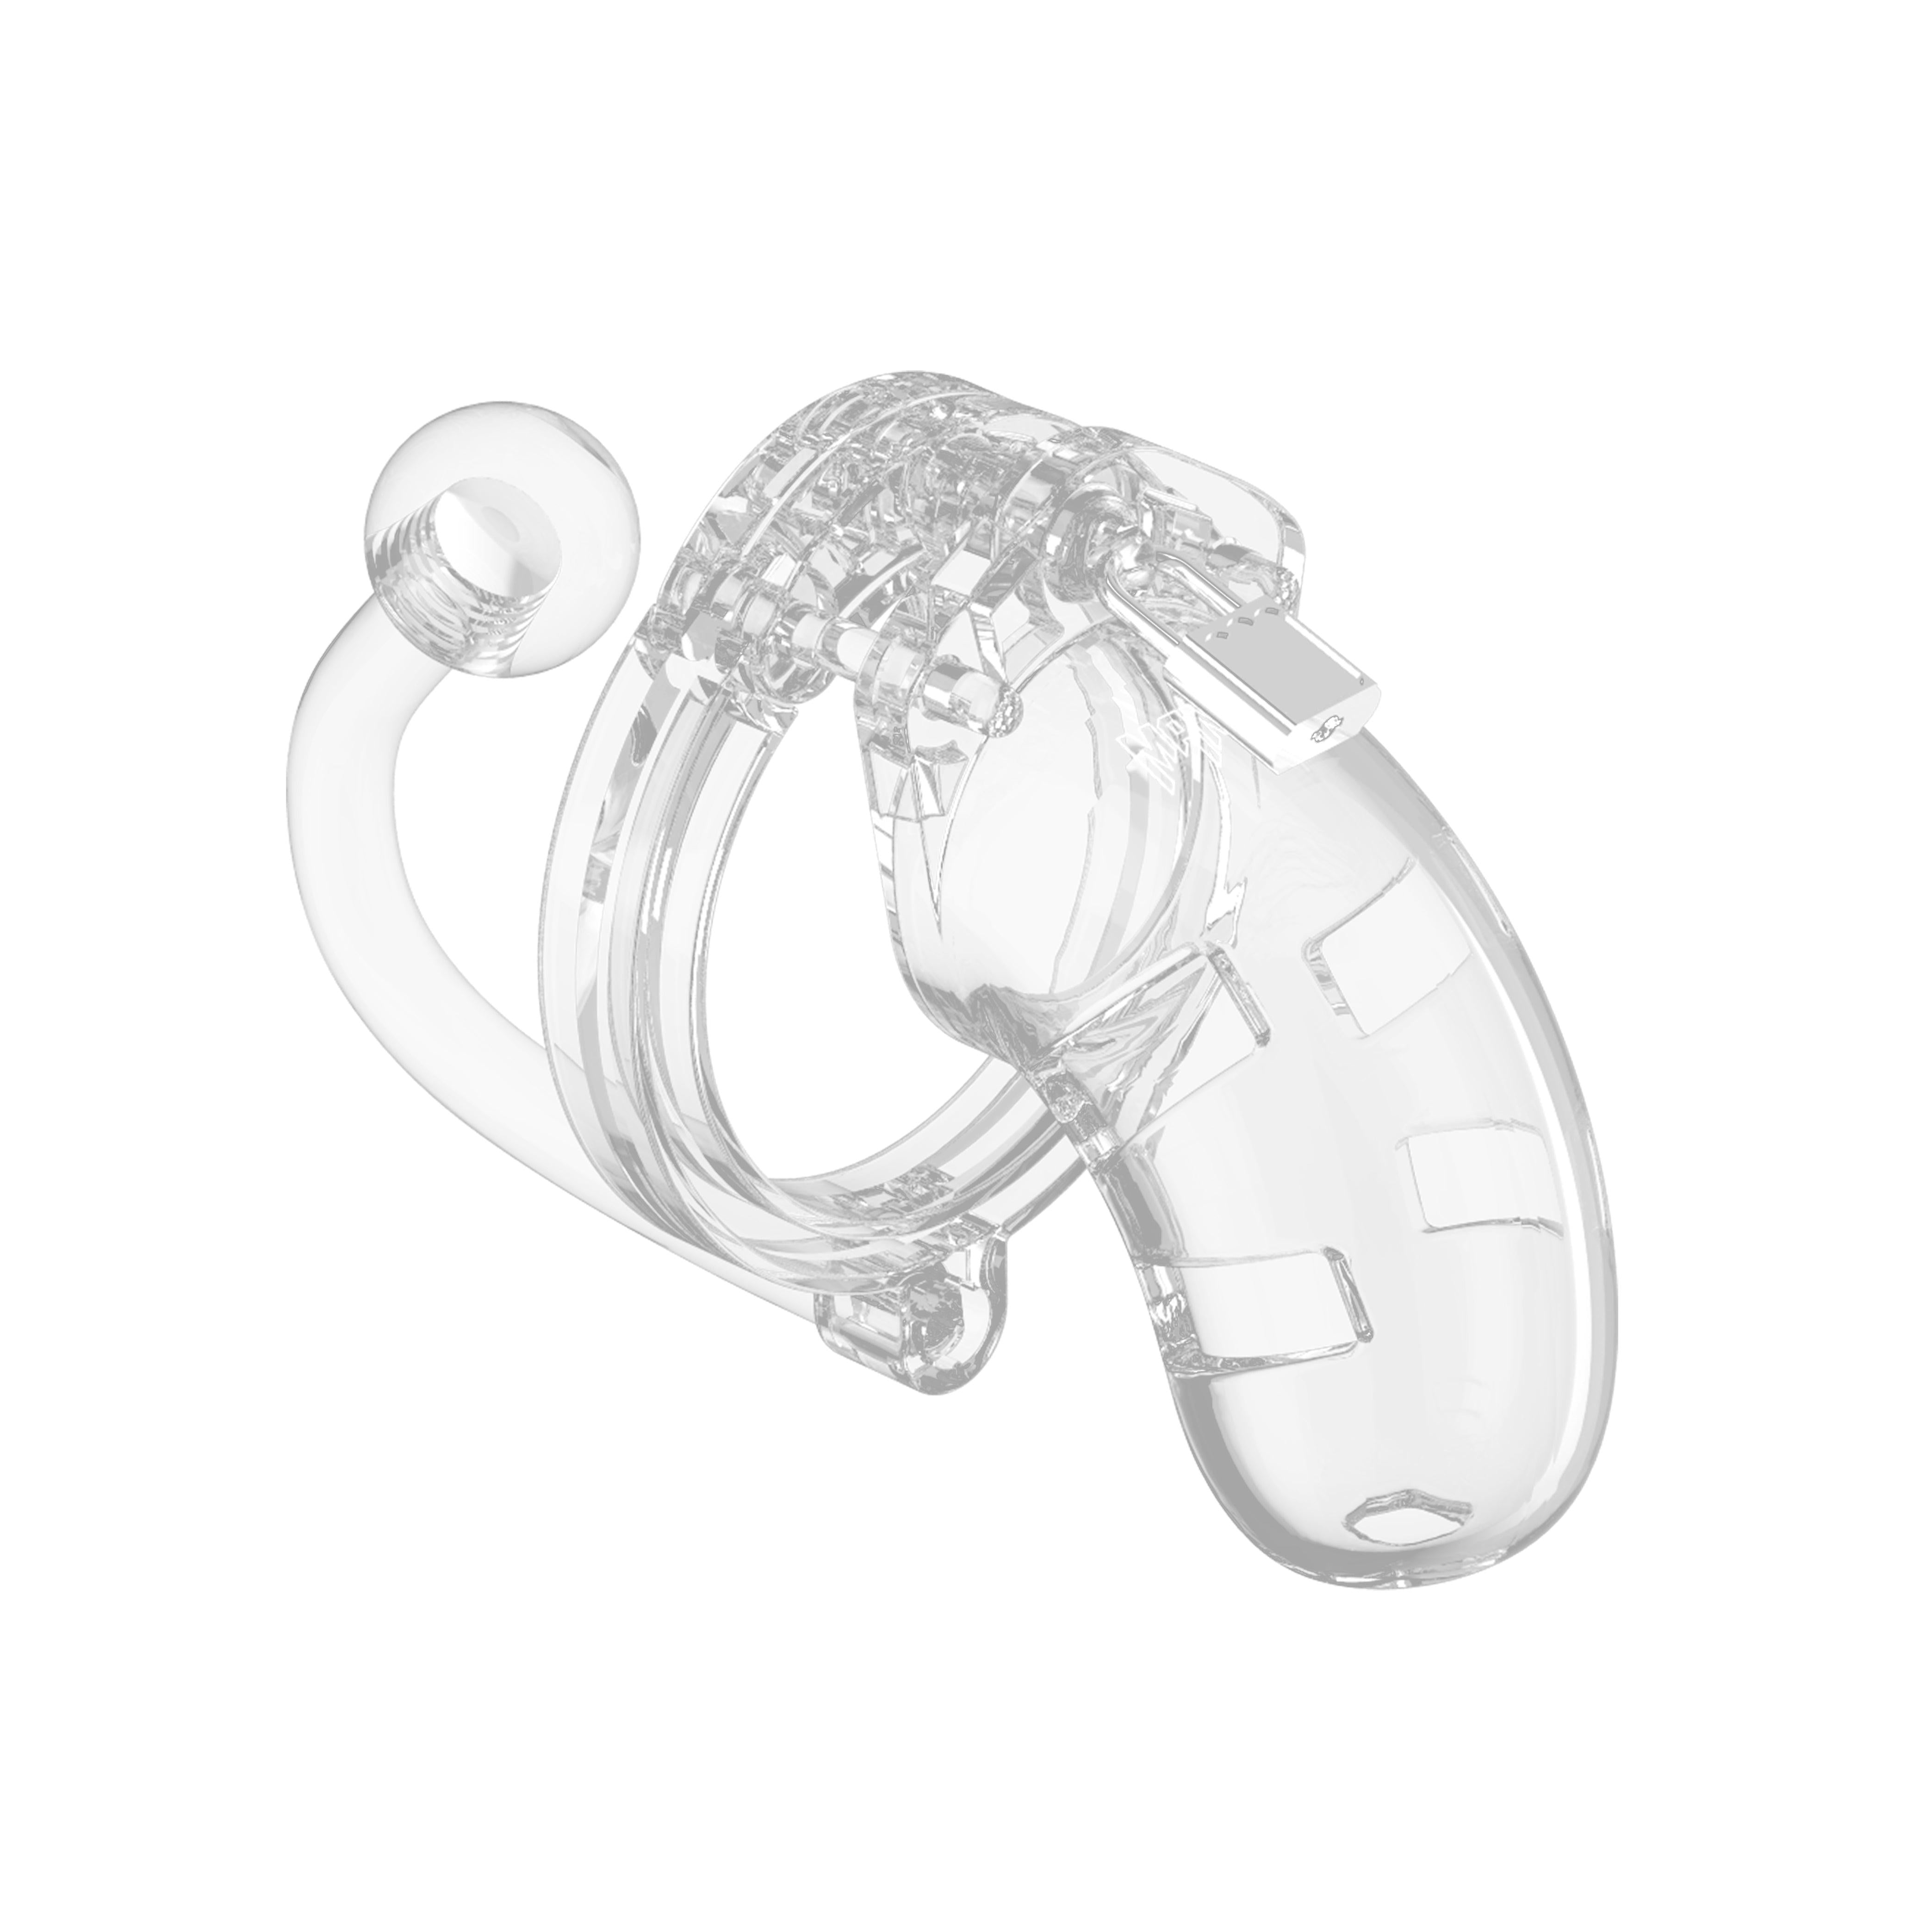 Man Cage 10 Male 3.5 Inch Clear Chastity Cage With Anal Plug - Adult Planet - Online Sex Toys Shop UK